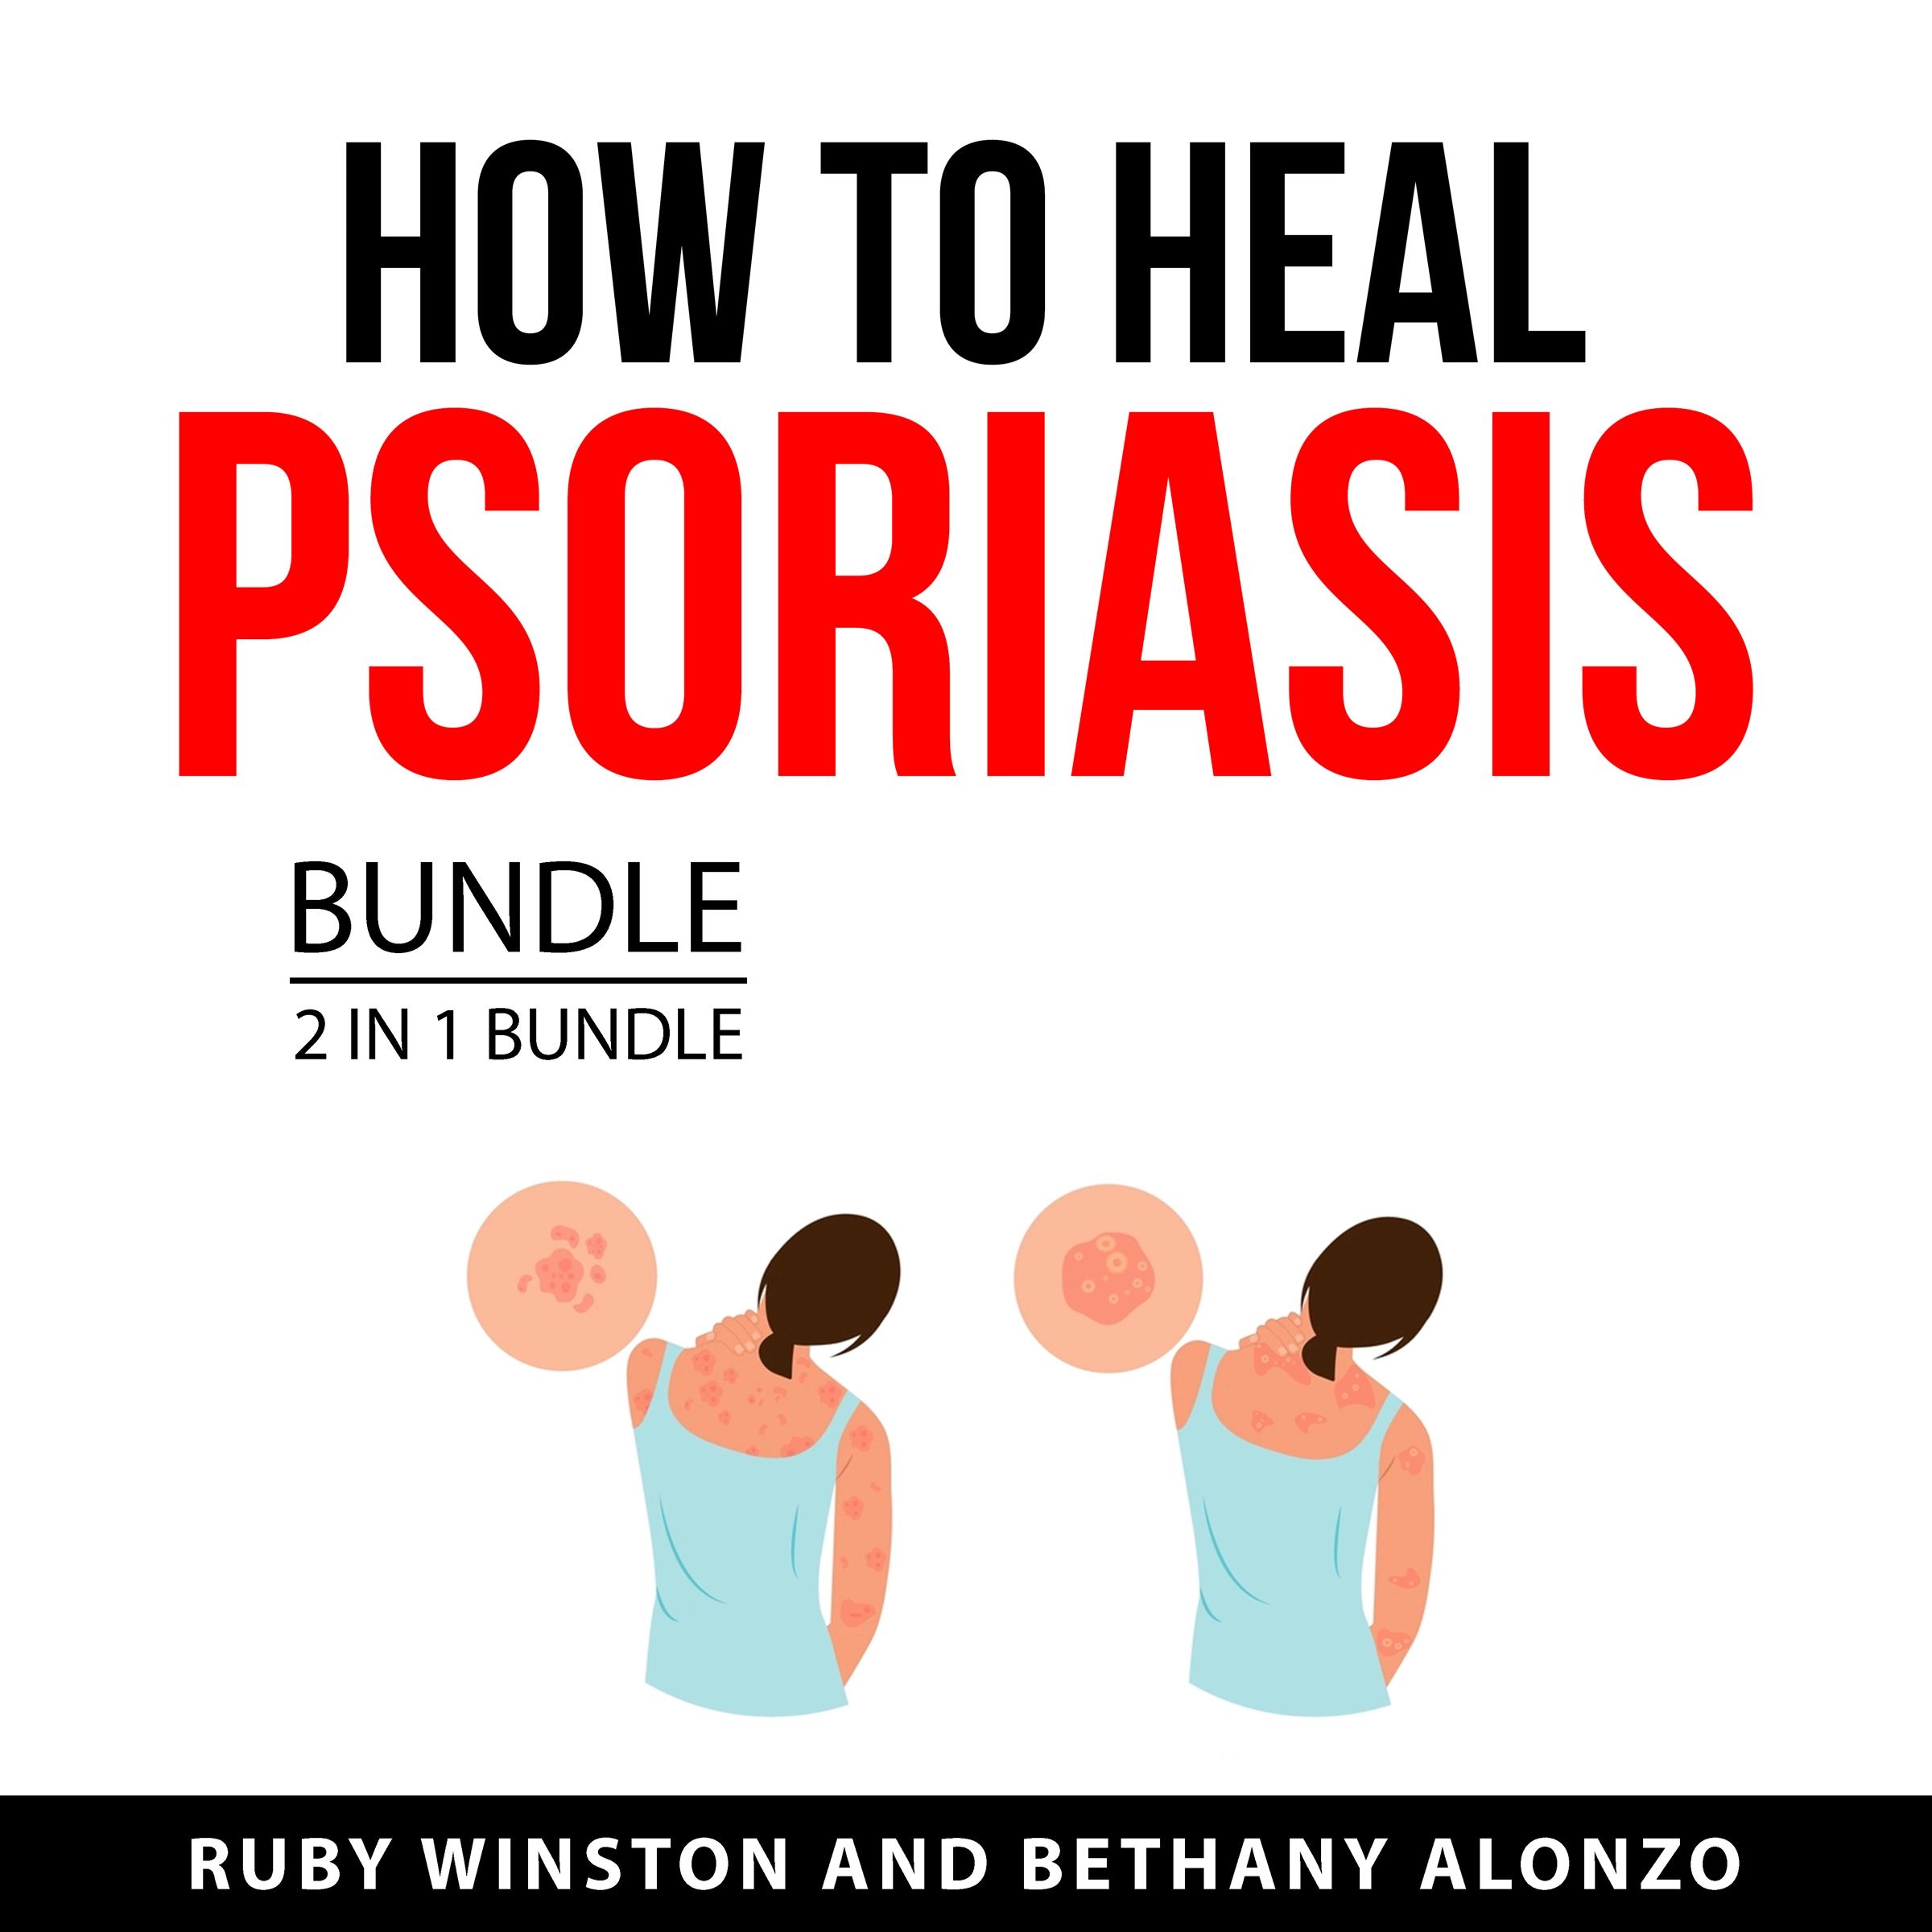 How to Heal Psoriasis Bundle, 2 in 1 Bundle by Bethany Alonzo